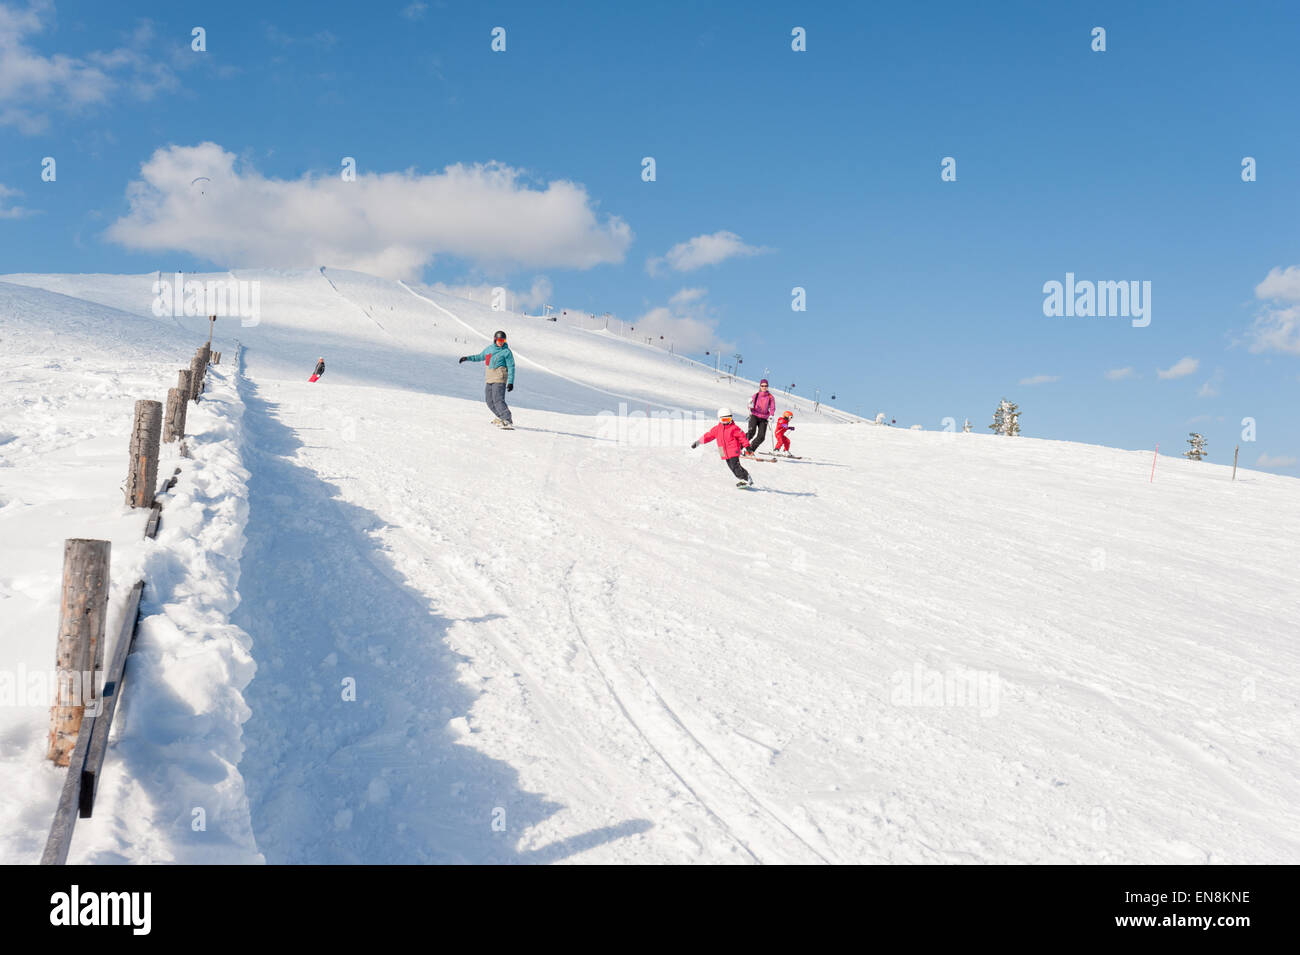 Spring skiing at Ylläs ski resort, Lapland, Finland. For MR please enquire. Stock Photo